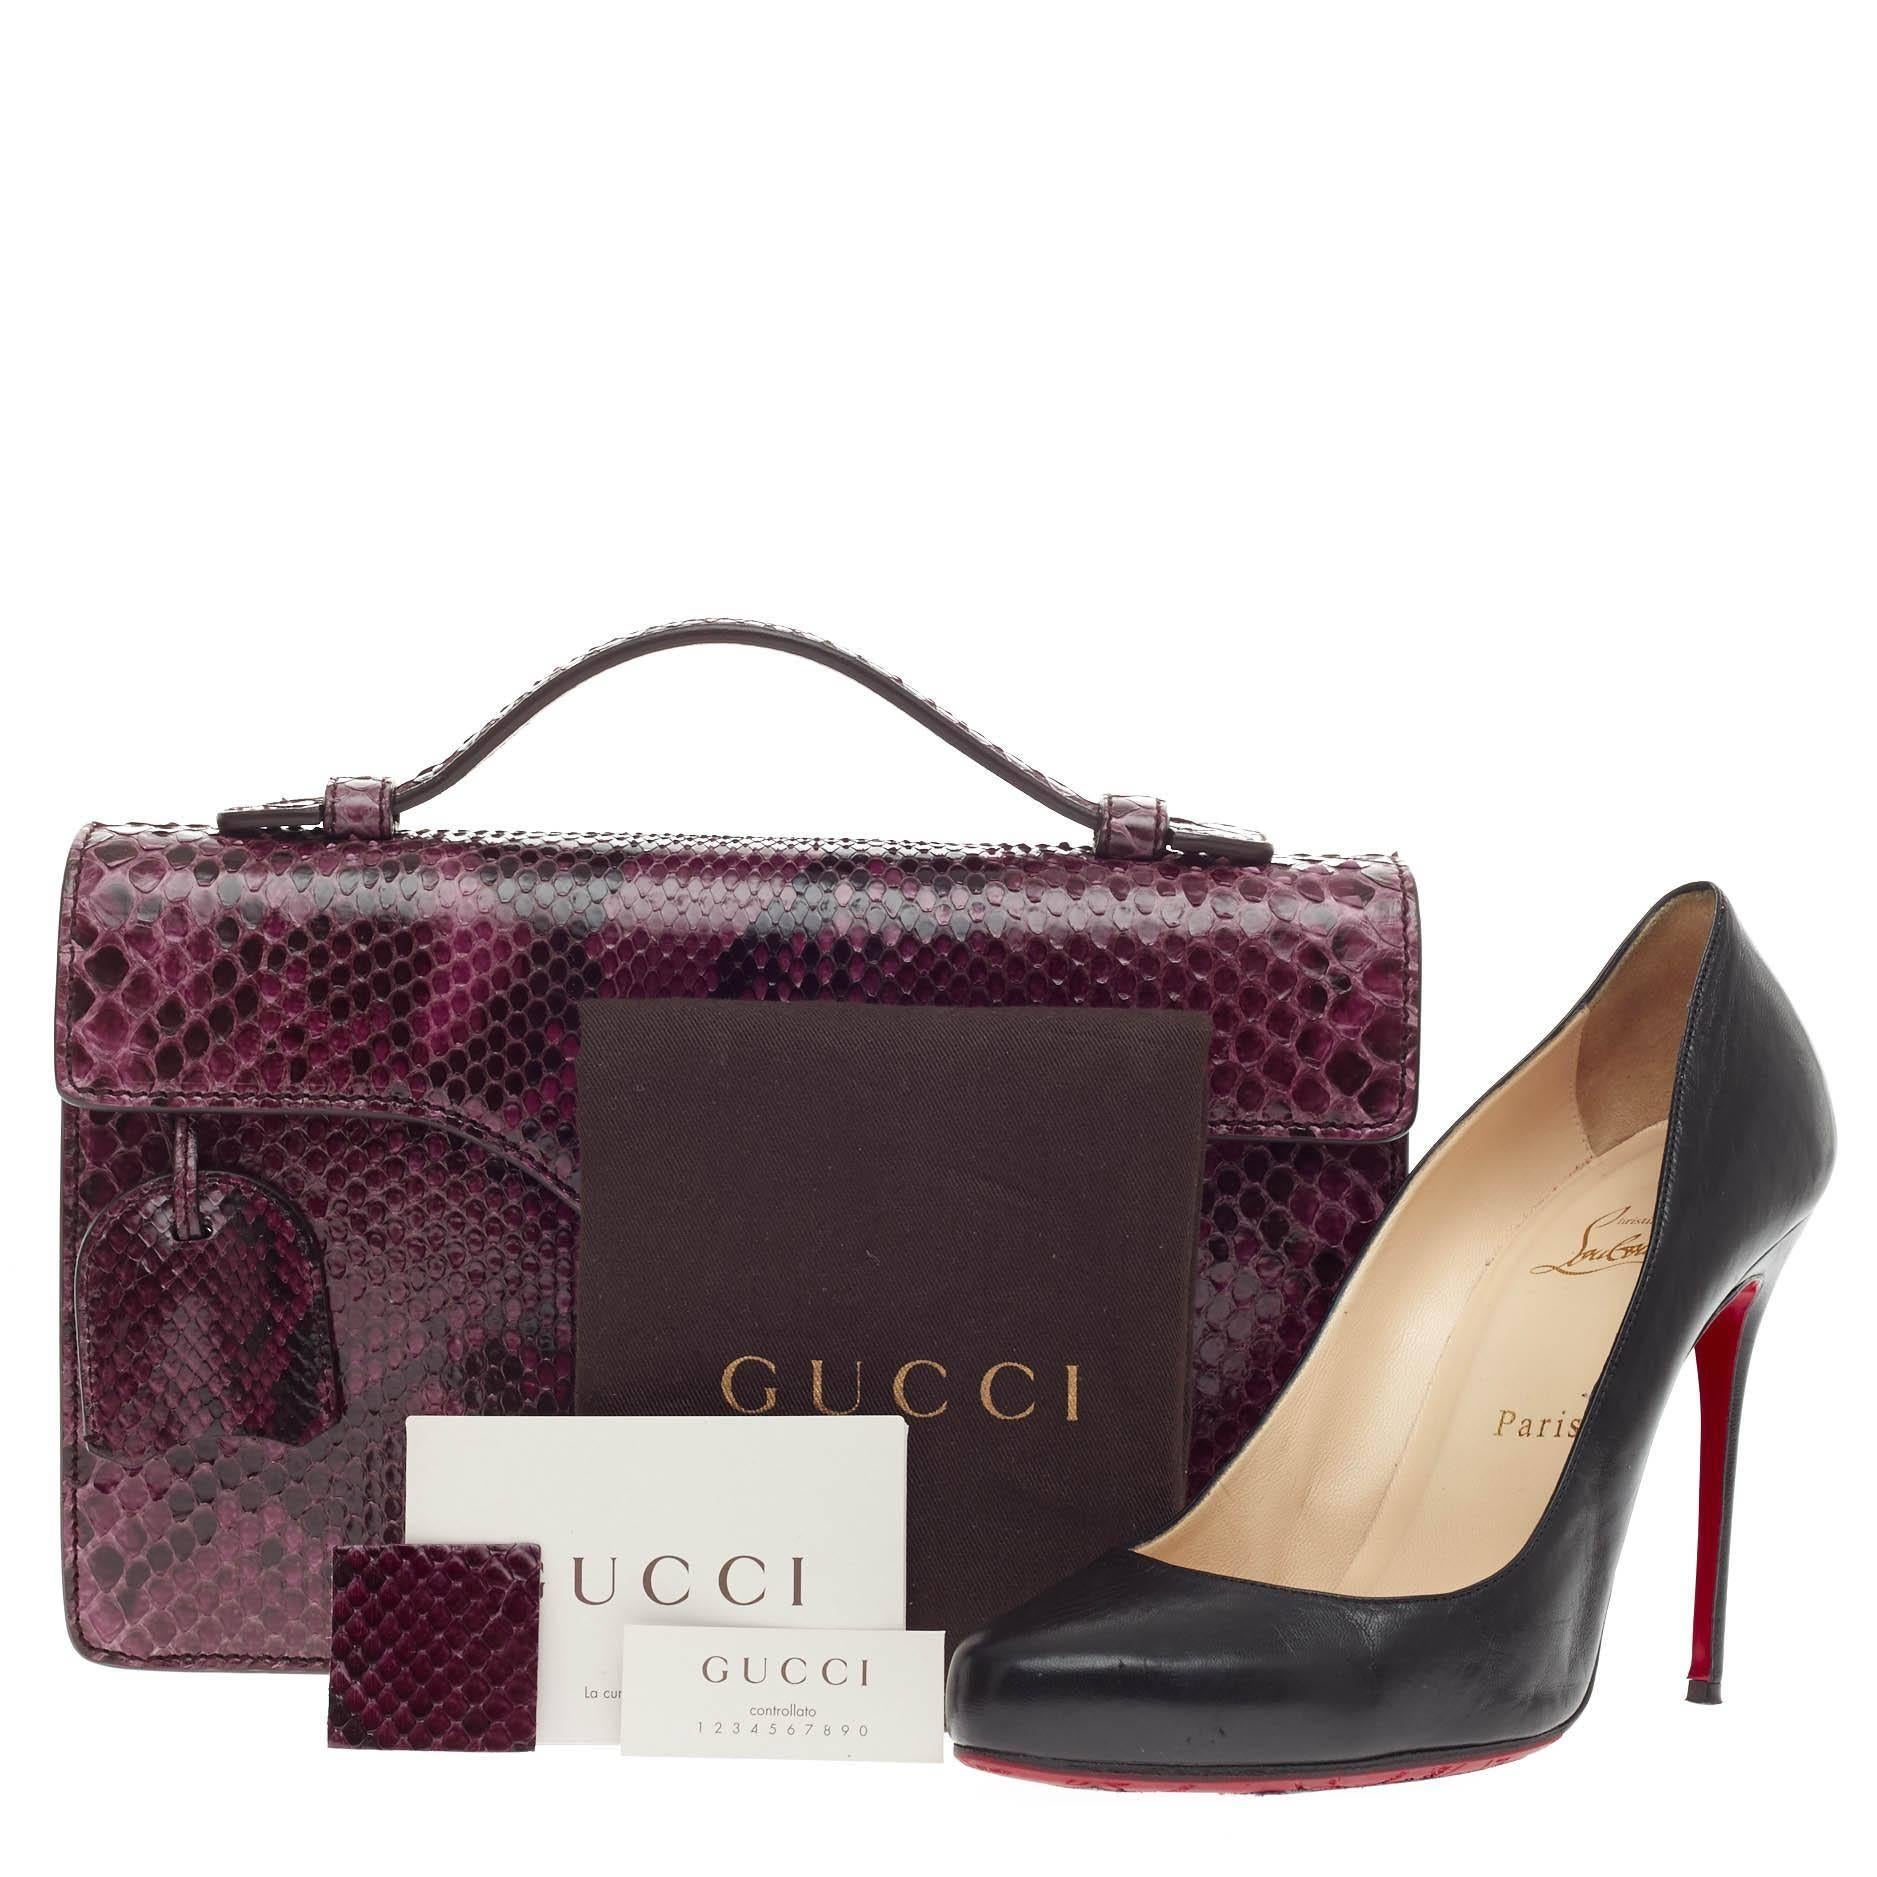 This authentic Gucci Lady Lock Briefcase Clutch Python is the perfect small accessory for work or  night out. Crafted in purple genuine python skin, this briefcase features top handle, lady lock closure, frontal flap, leather clochette and